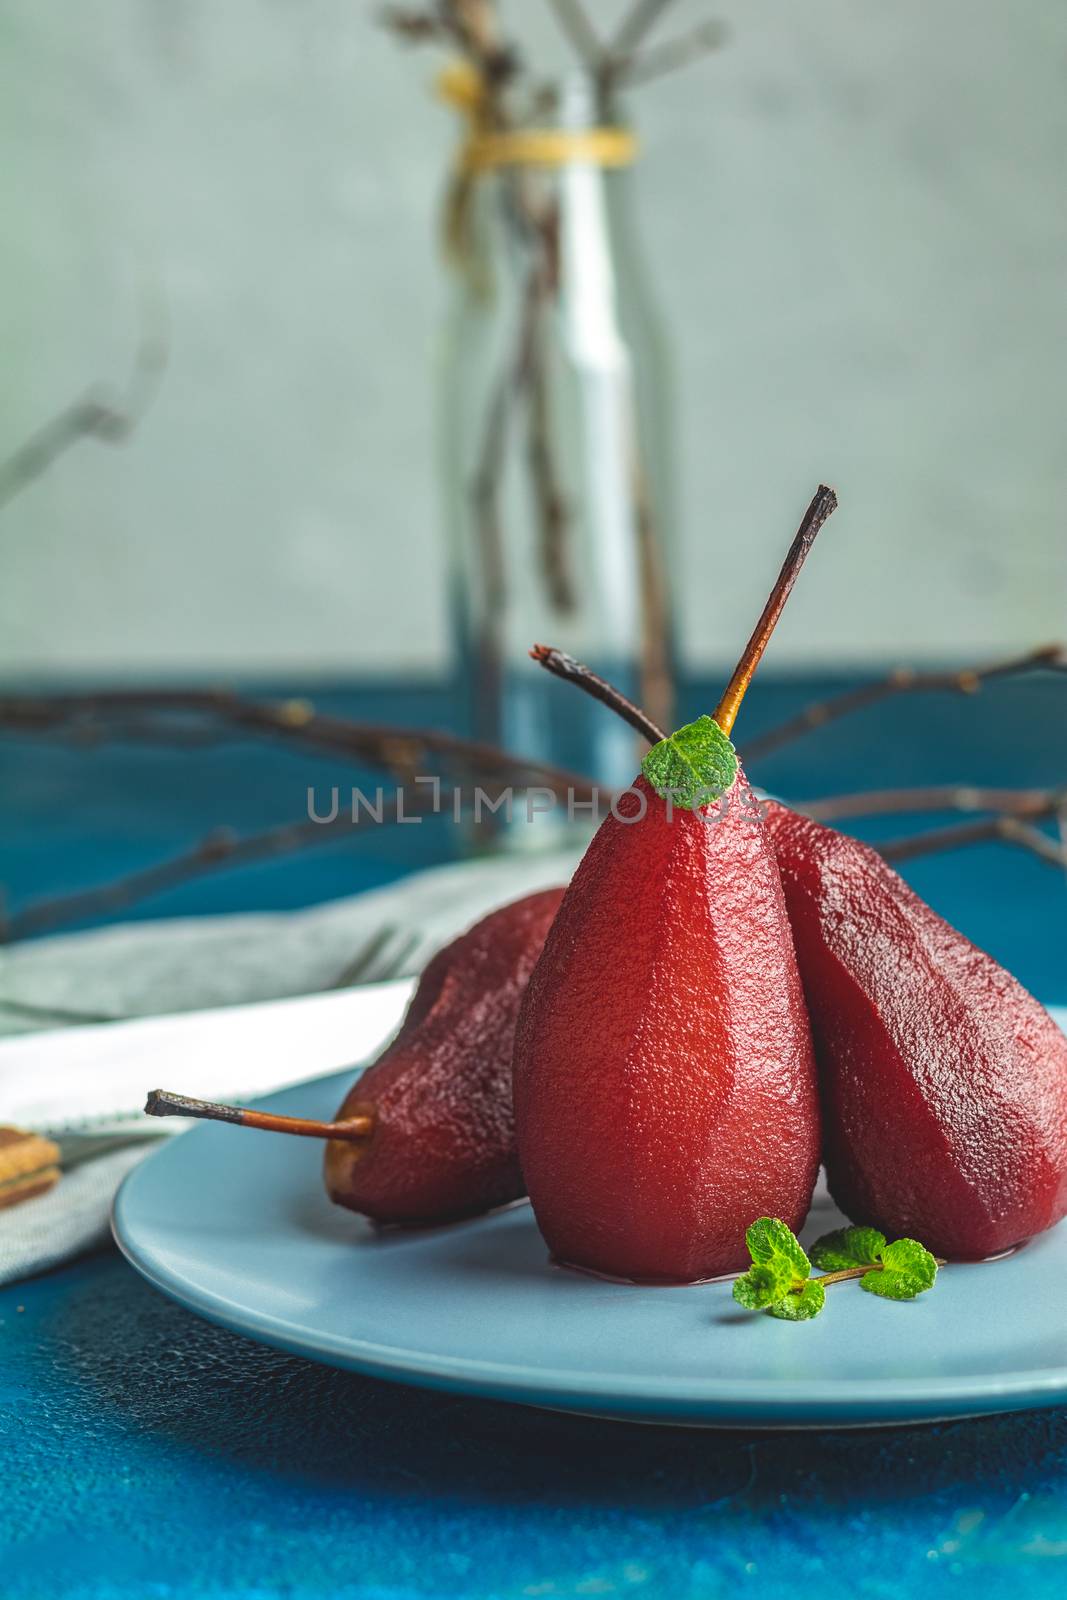 Traditional dessert pears stewed in red wine with chocolate sauce on plate on blue concrete surface. Concept for romantic dinner dessert. Simple Paleo style dessert pear poached in pomegranate juice